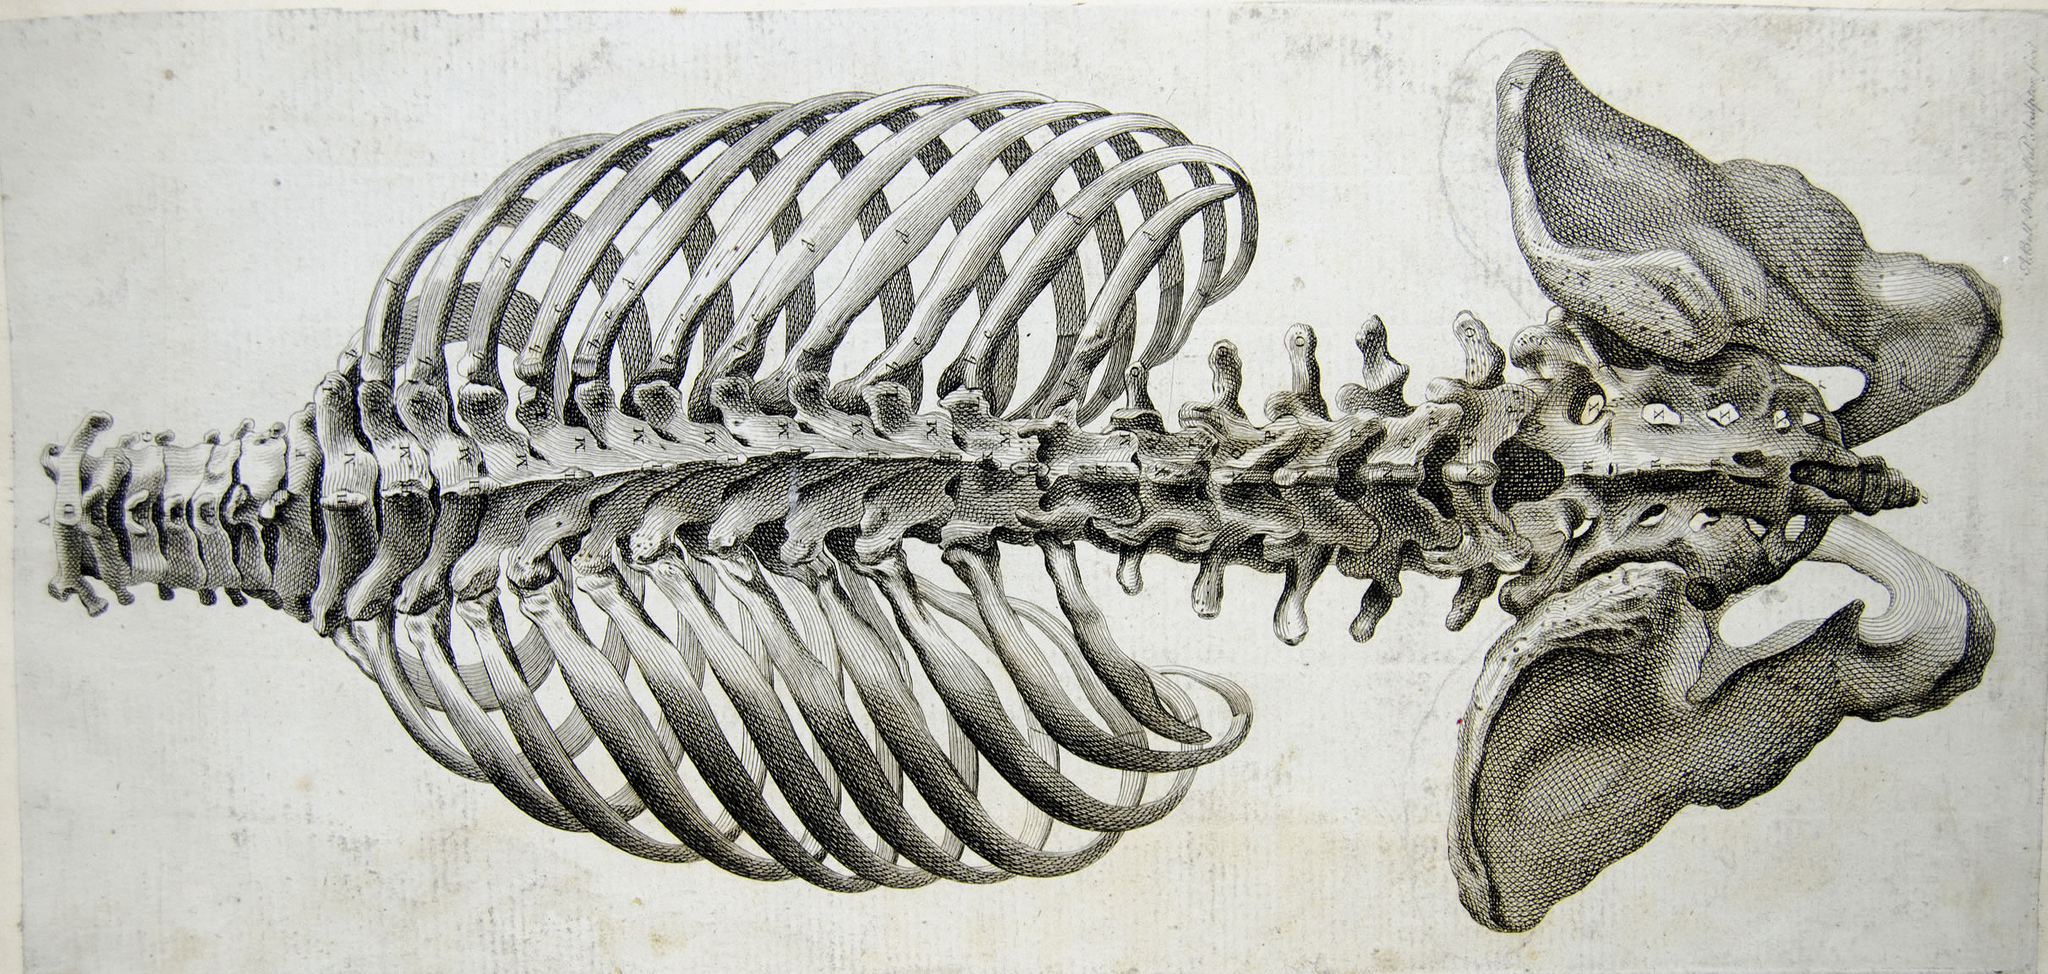 Rear view of the bones of the torso, spine and pelvis by Andrew Bell (CC BY-SA 2.0) from https://www.flickr.com/photos/liverpoolhls/